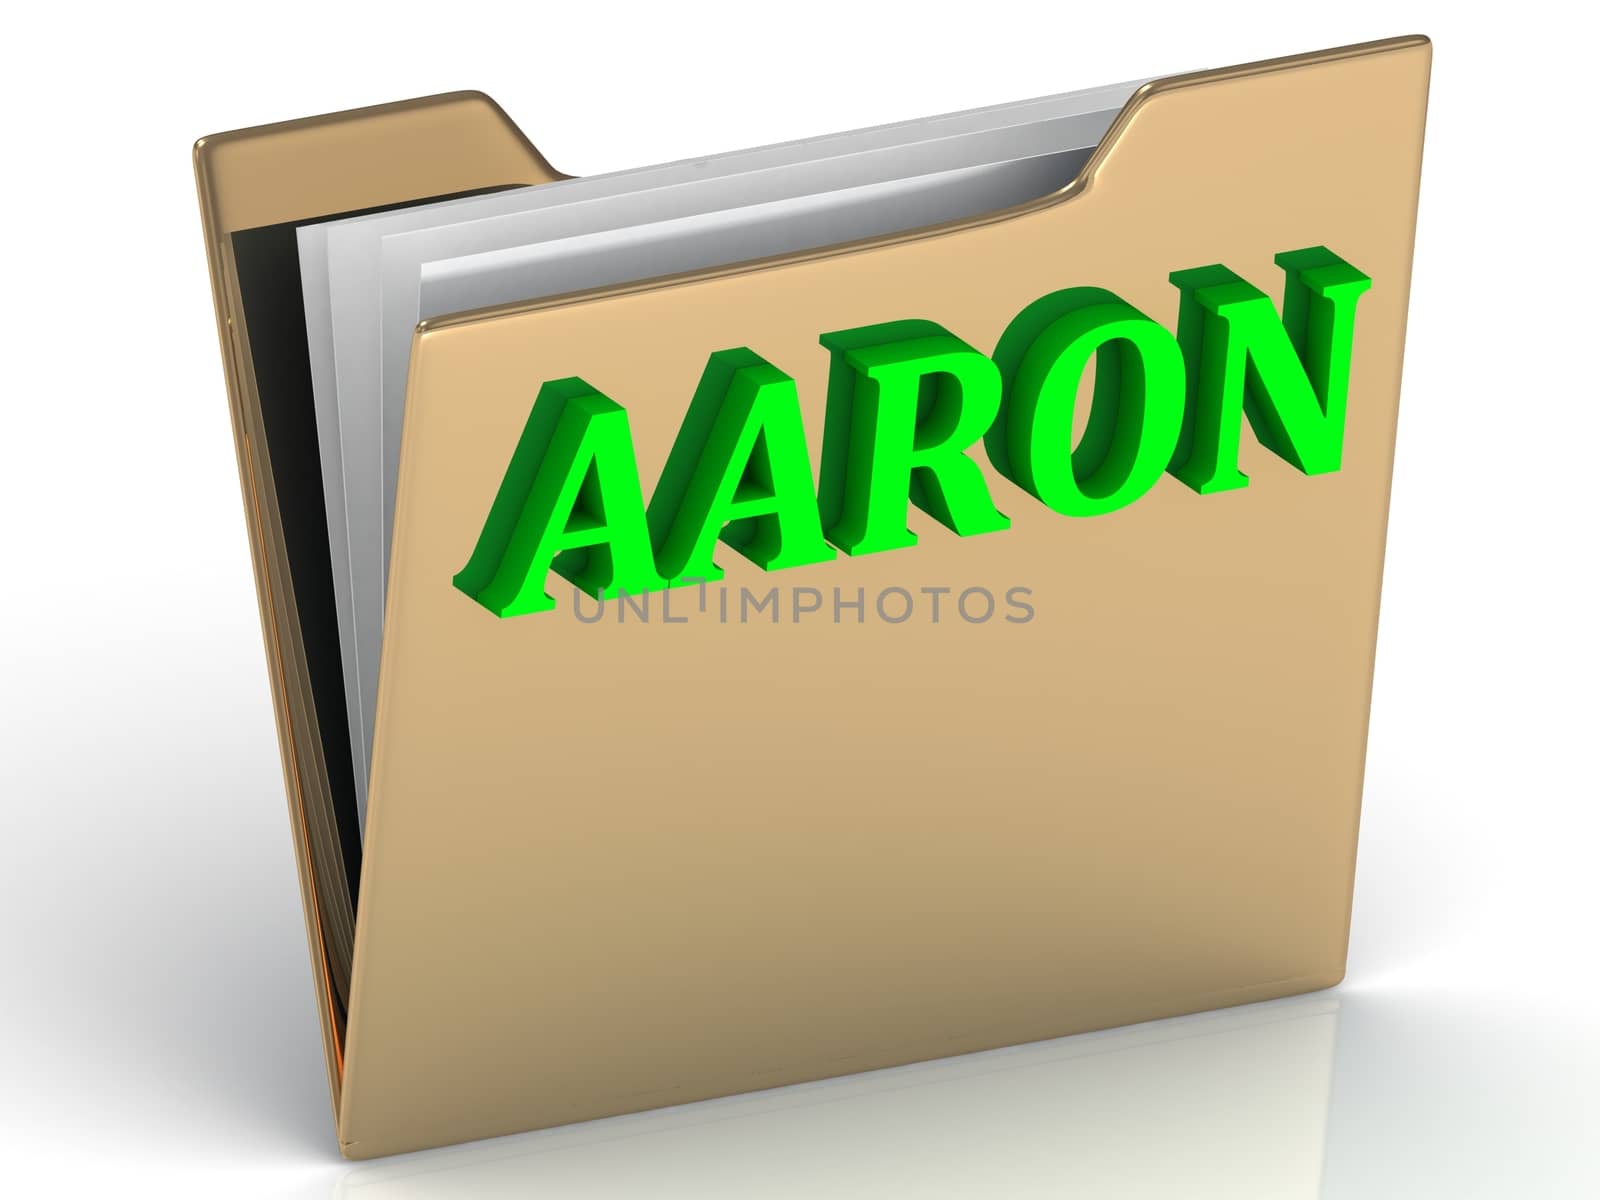 AARON- bright green letters on gold paperwork folder by GreenMost